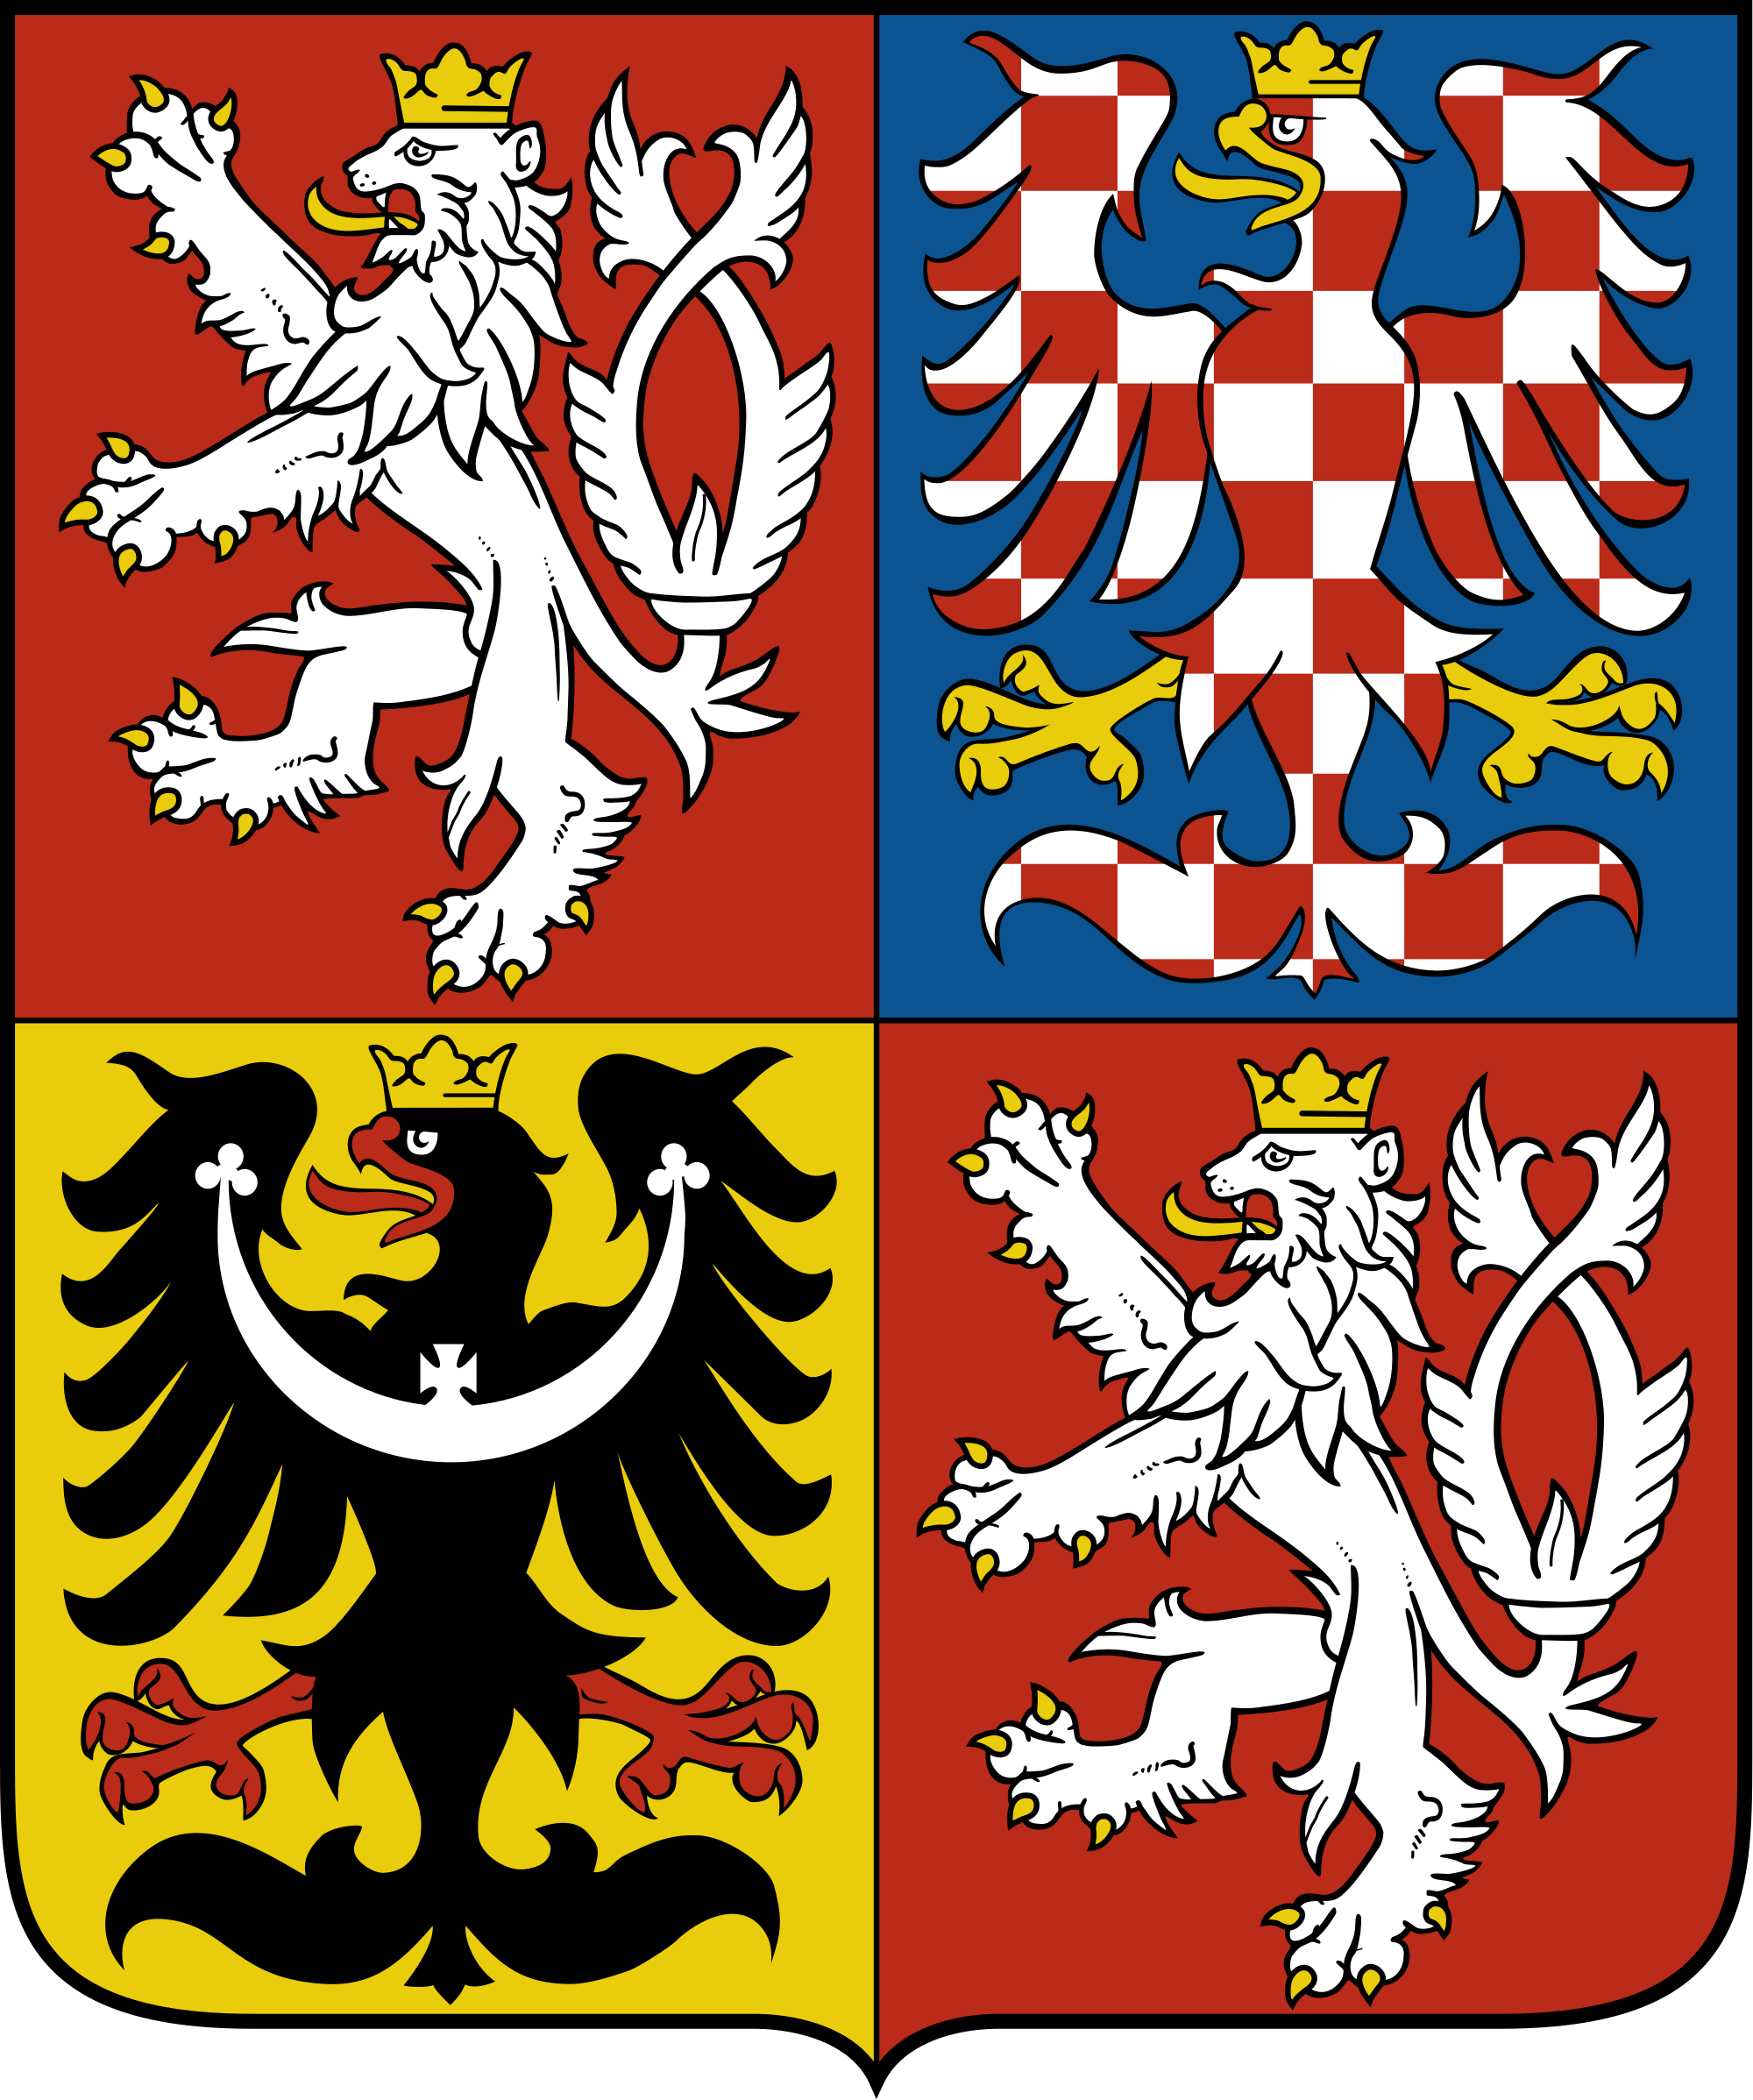 2000px-coat_of_arms_of_the_czech_republic.svg.png